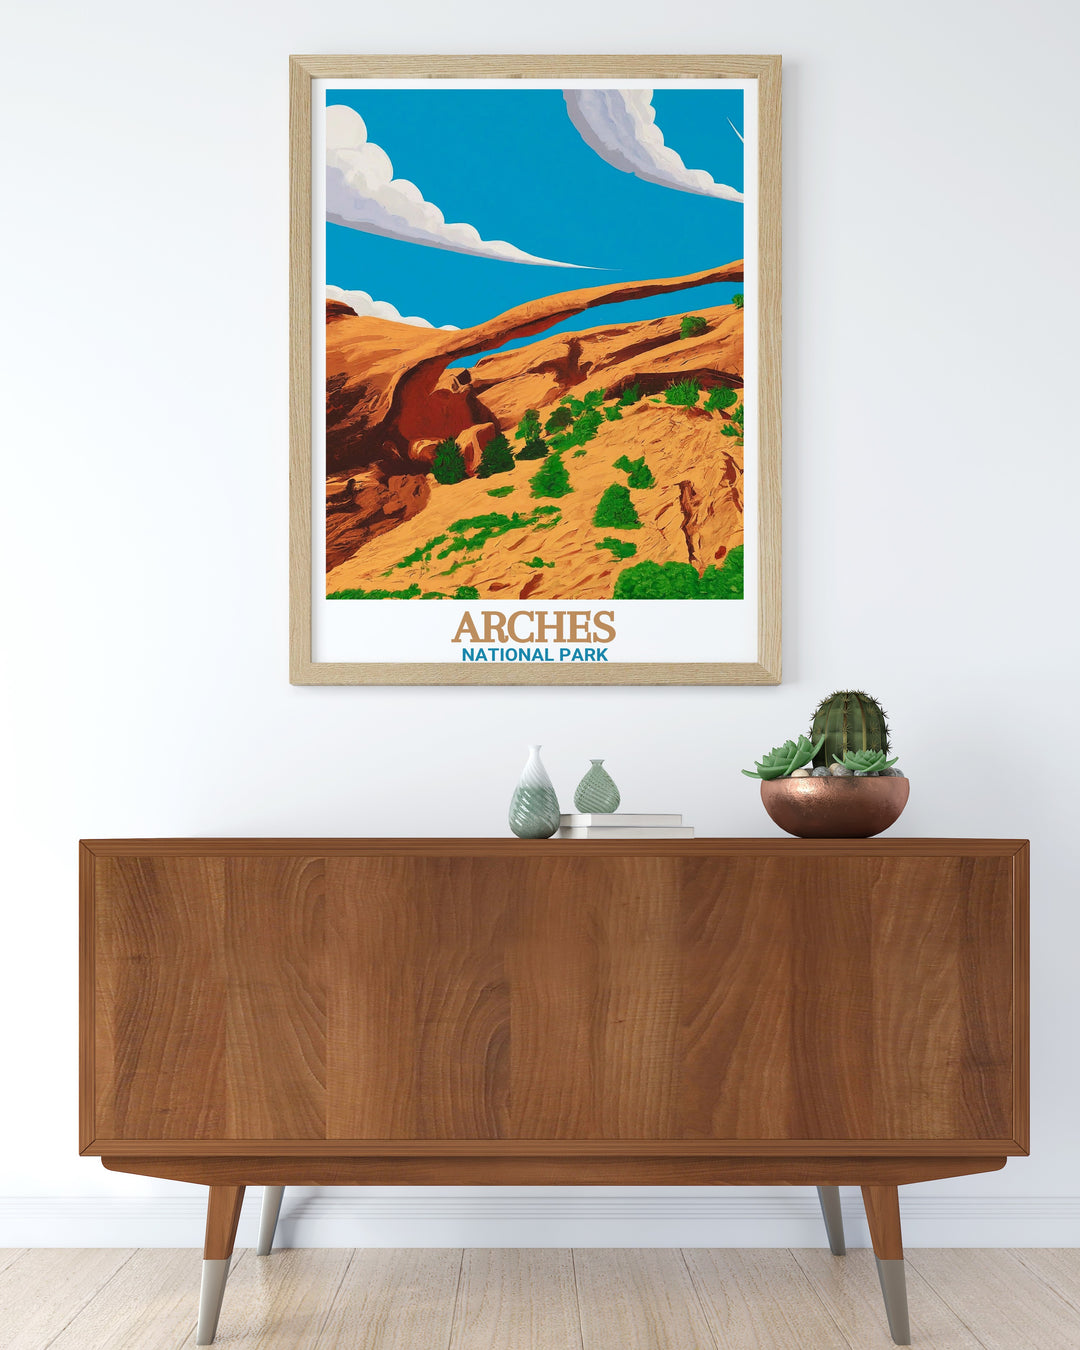 Beautiful Landscape Arch print capturing the breathtaking landscape of Arches National Park perfect for home decor or as a special gift for friends and family who appreciate National Park art and the great outdoors.